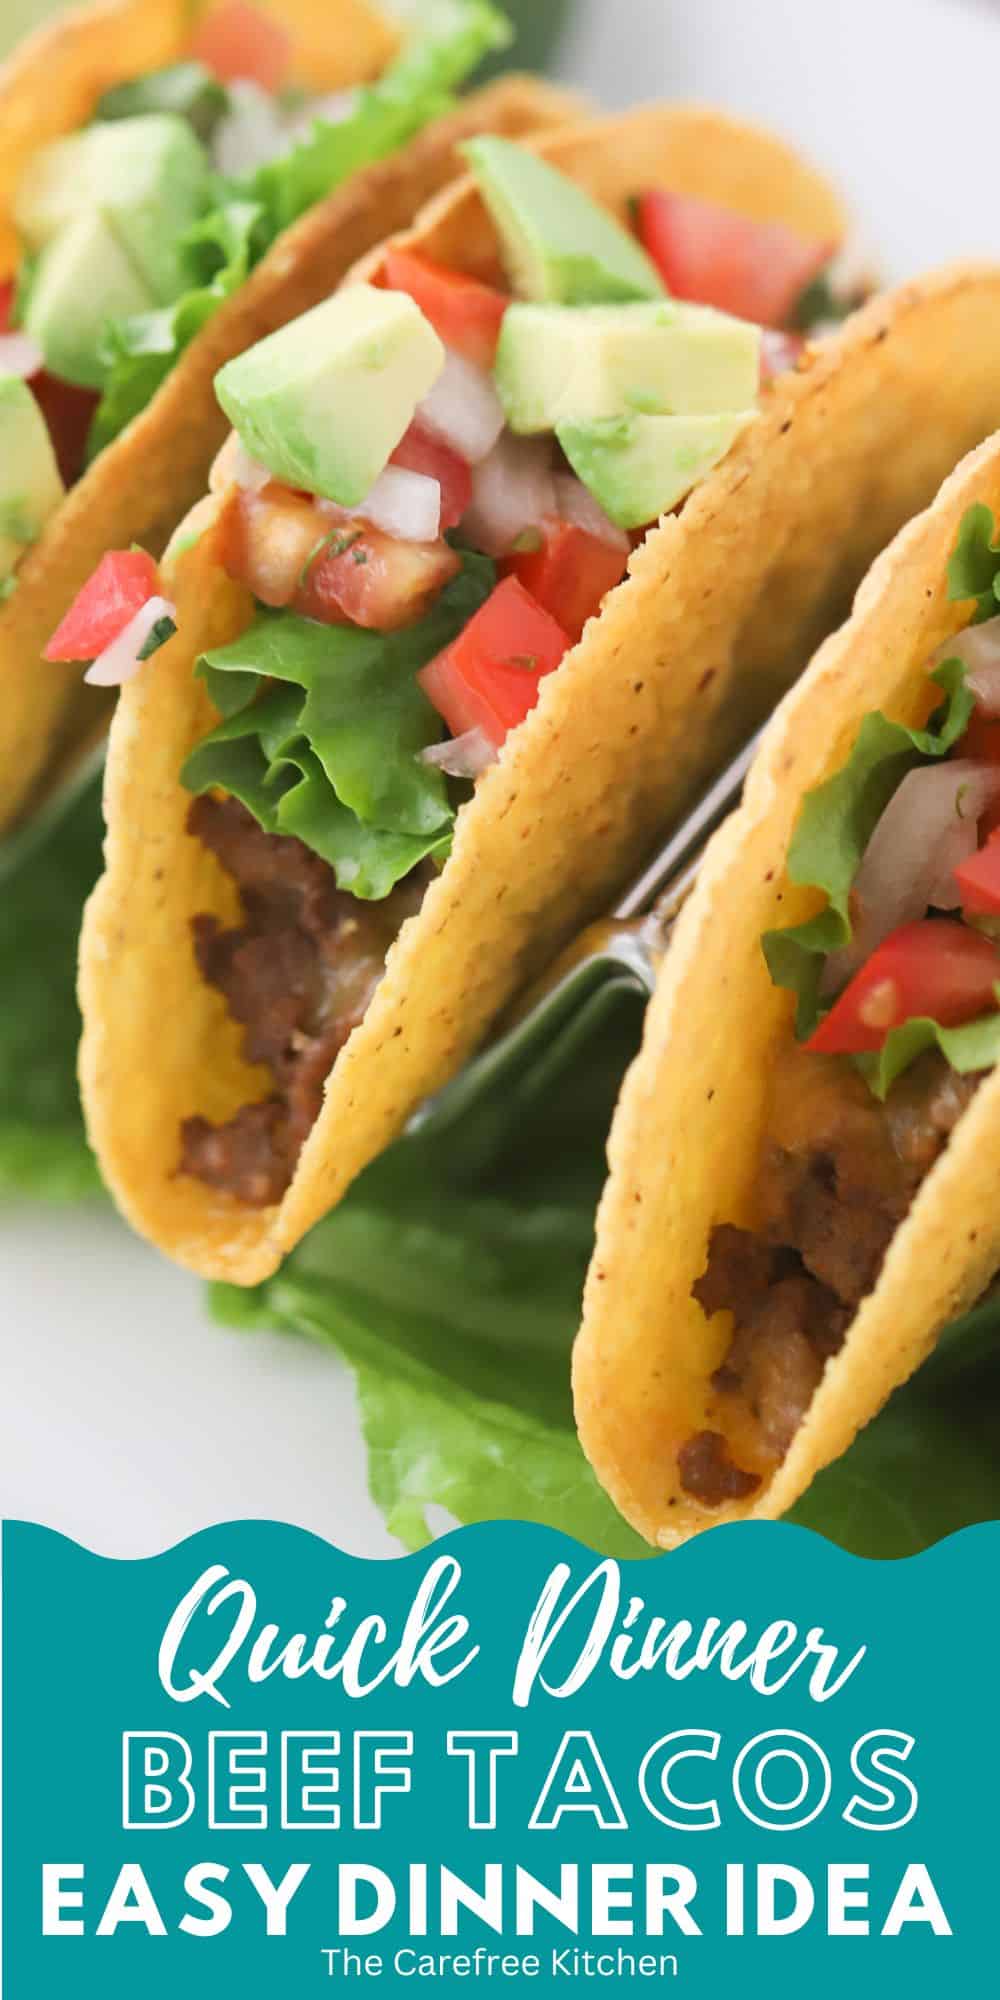 Crispy Taco with Ground Beef - The Carefree Kitchen